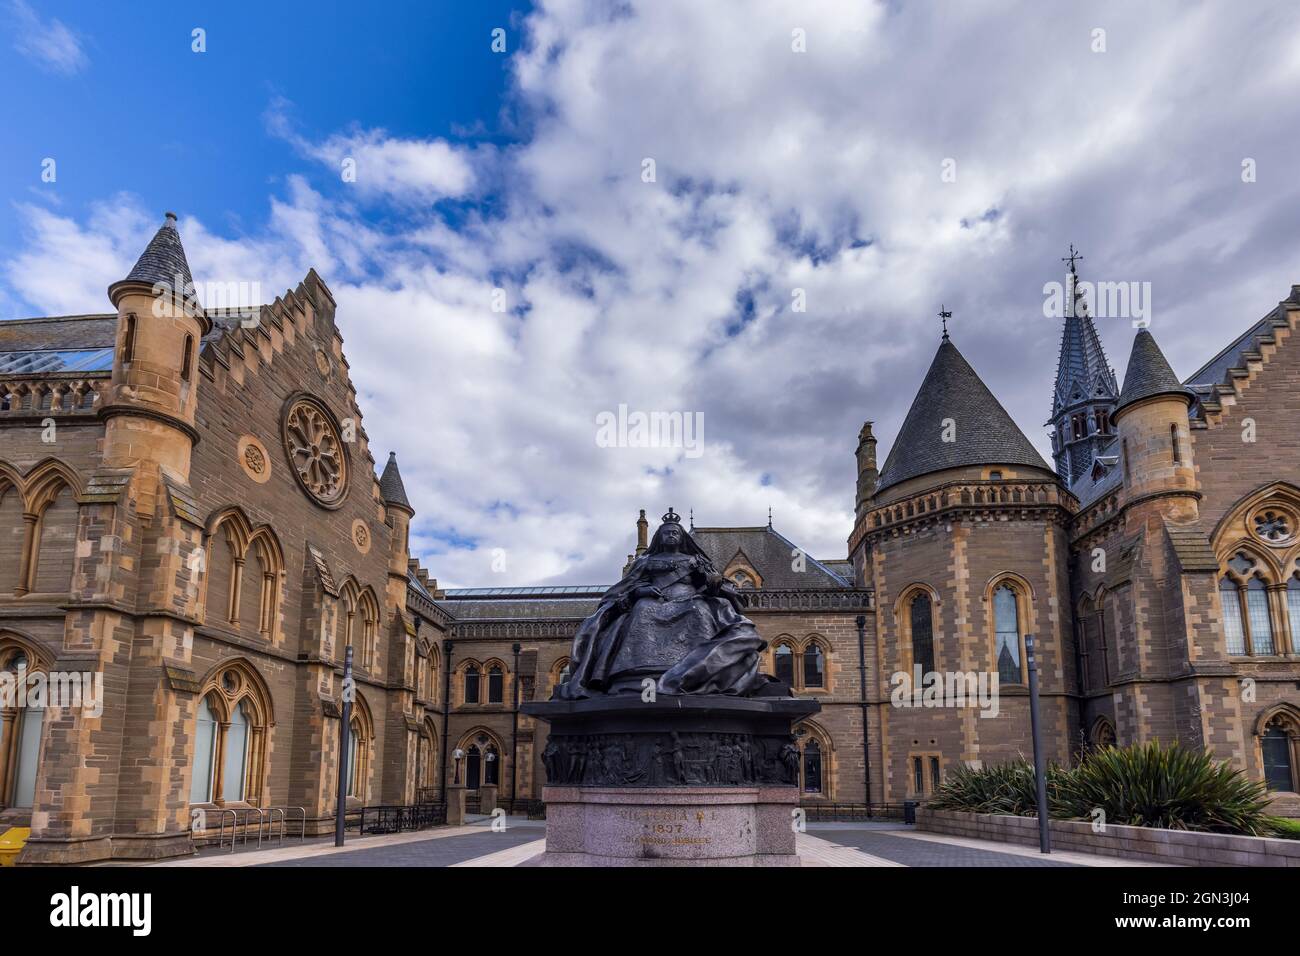 The statue of Queen Victoria situated in front of the McManus Art Gallery and Museum in Albert Square, Dundee, Scotland. Stock Photo